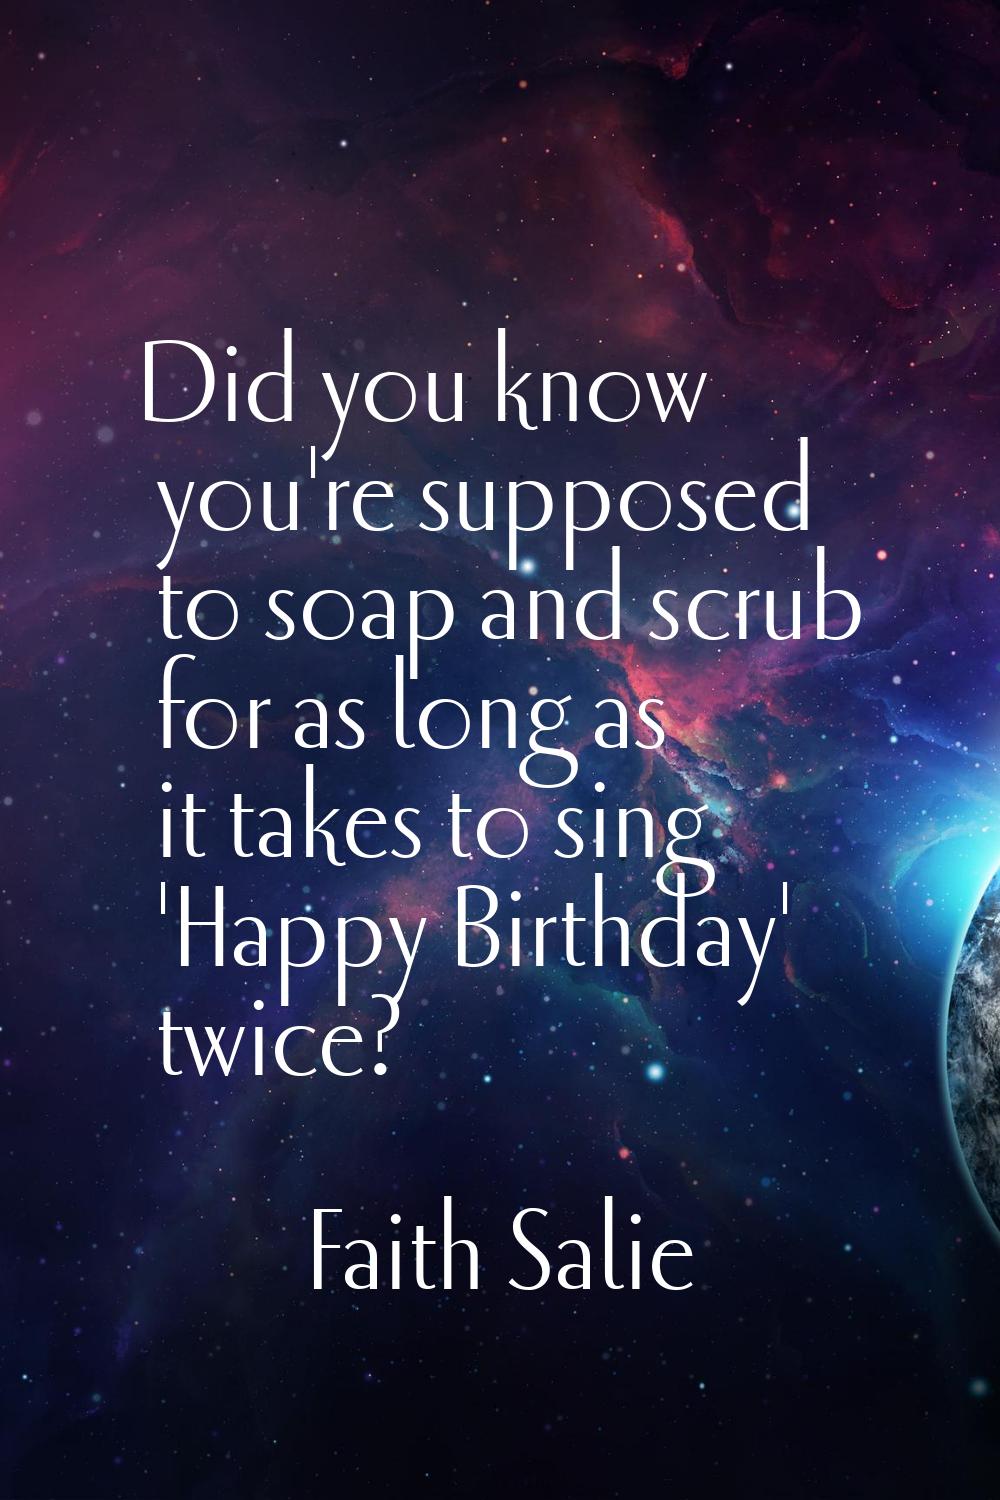 Did you know you're supposed to soap and scrub for as long as it takes to sing 'Happy Birthday' twi